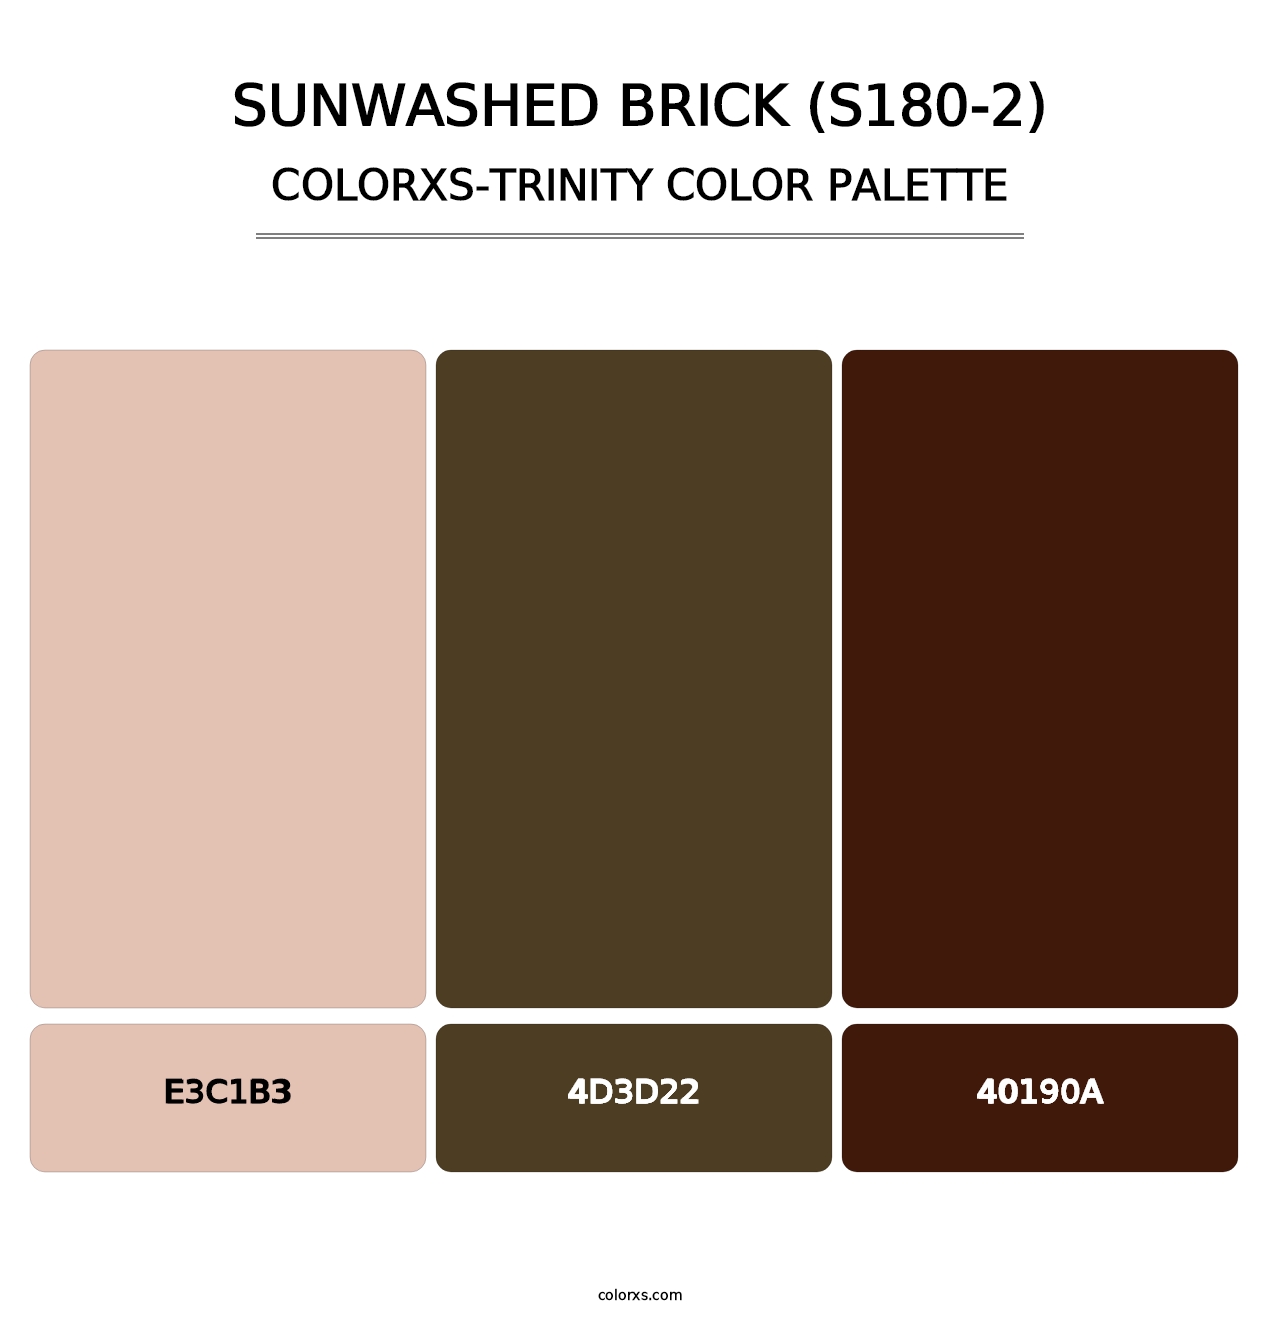 Sunwashed Brick (S180-2) - Colorxs Trinity Palette